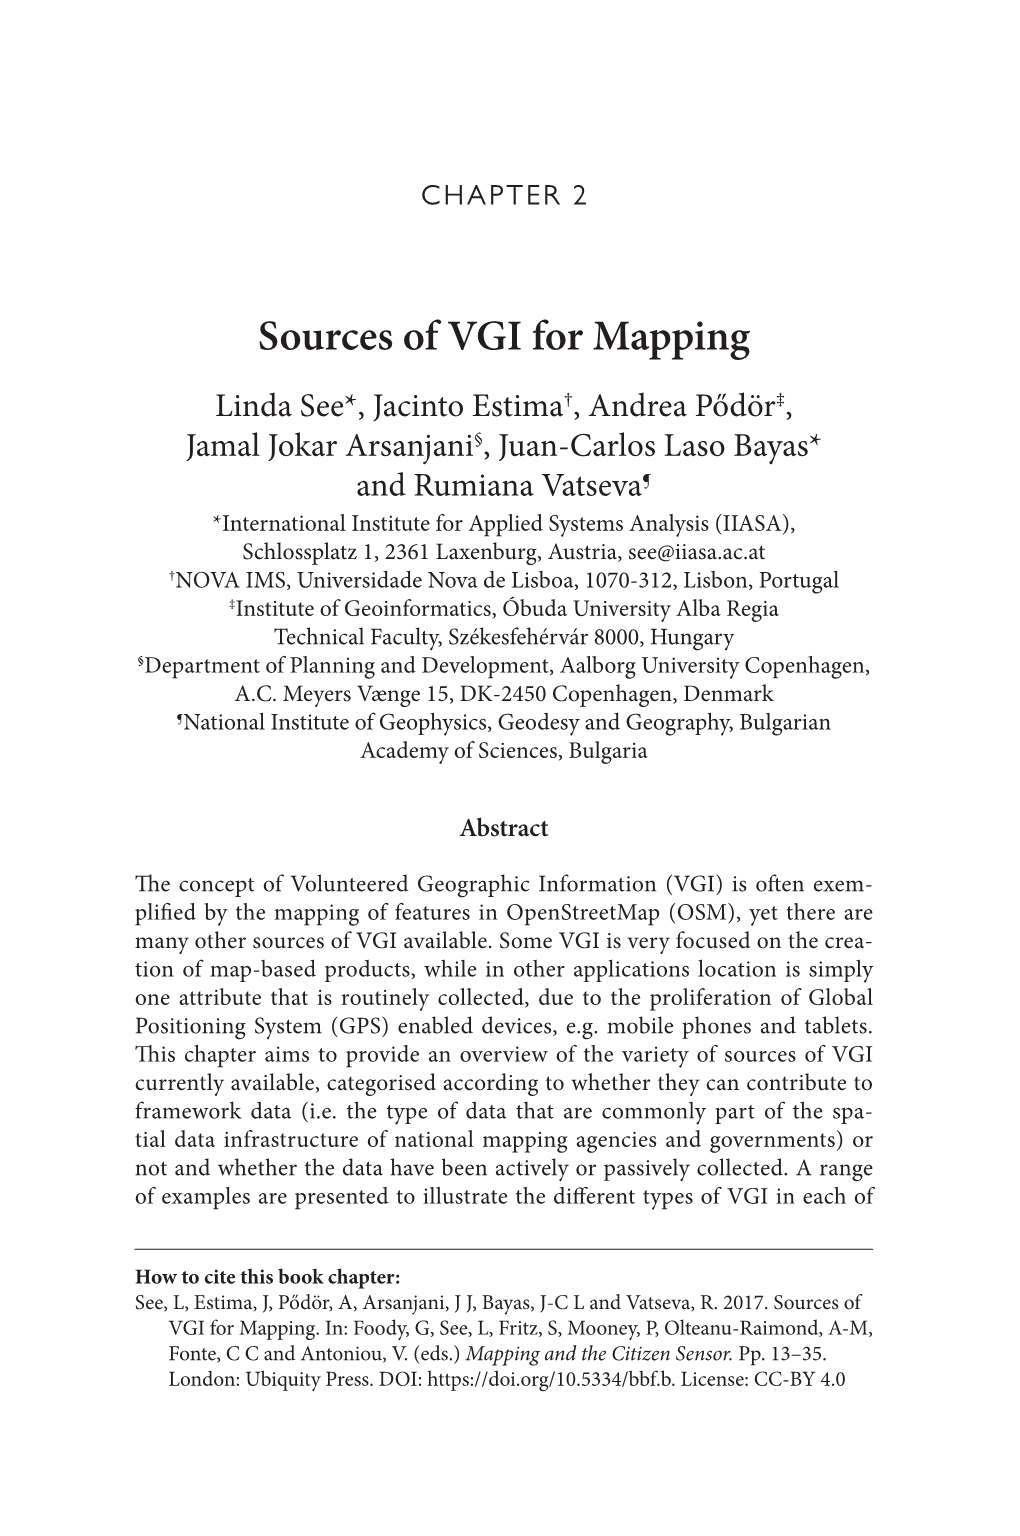 Sources of VGI for Mapping